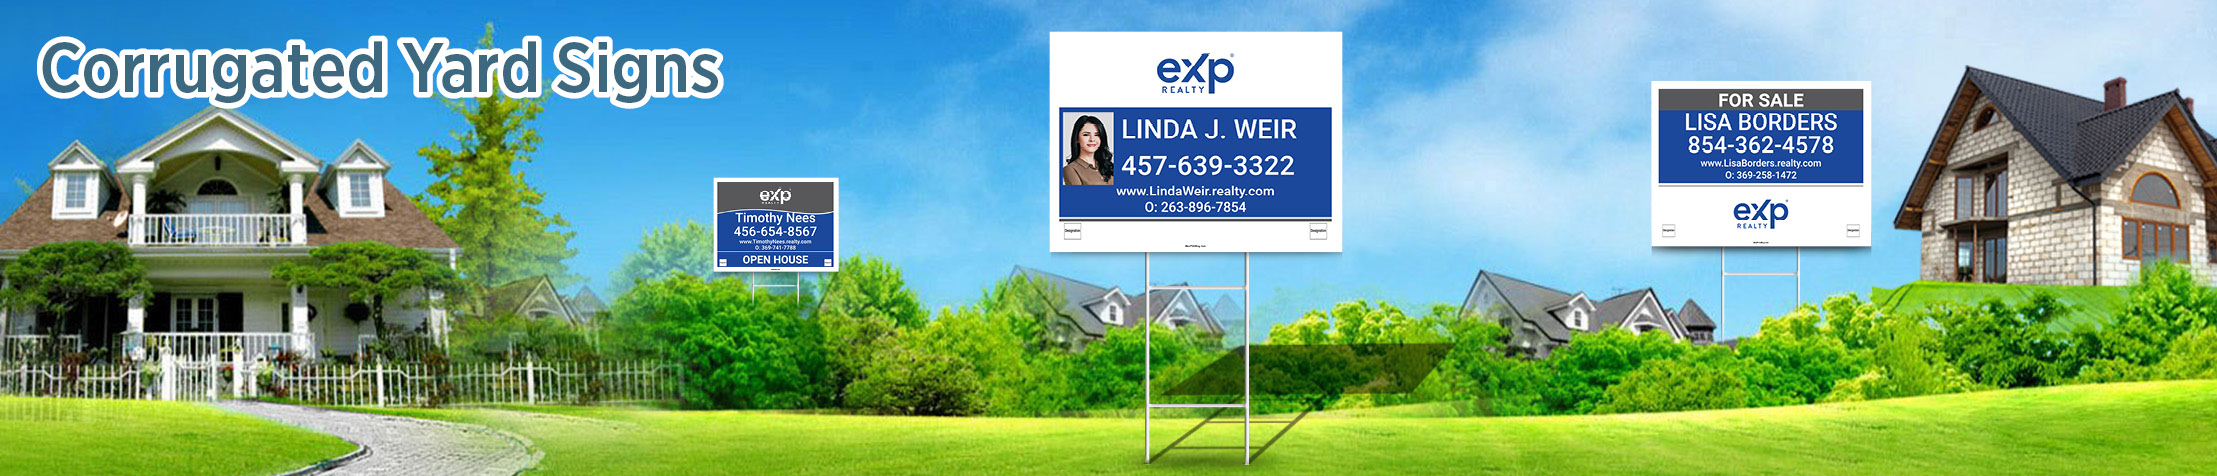 eXp Realty Real Estate Corrugated Yard Signs - eXp Realty  real estate signs | BestPrintBuy.com